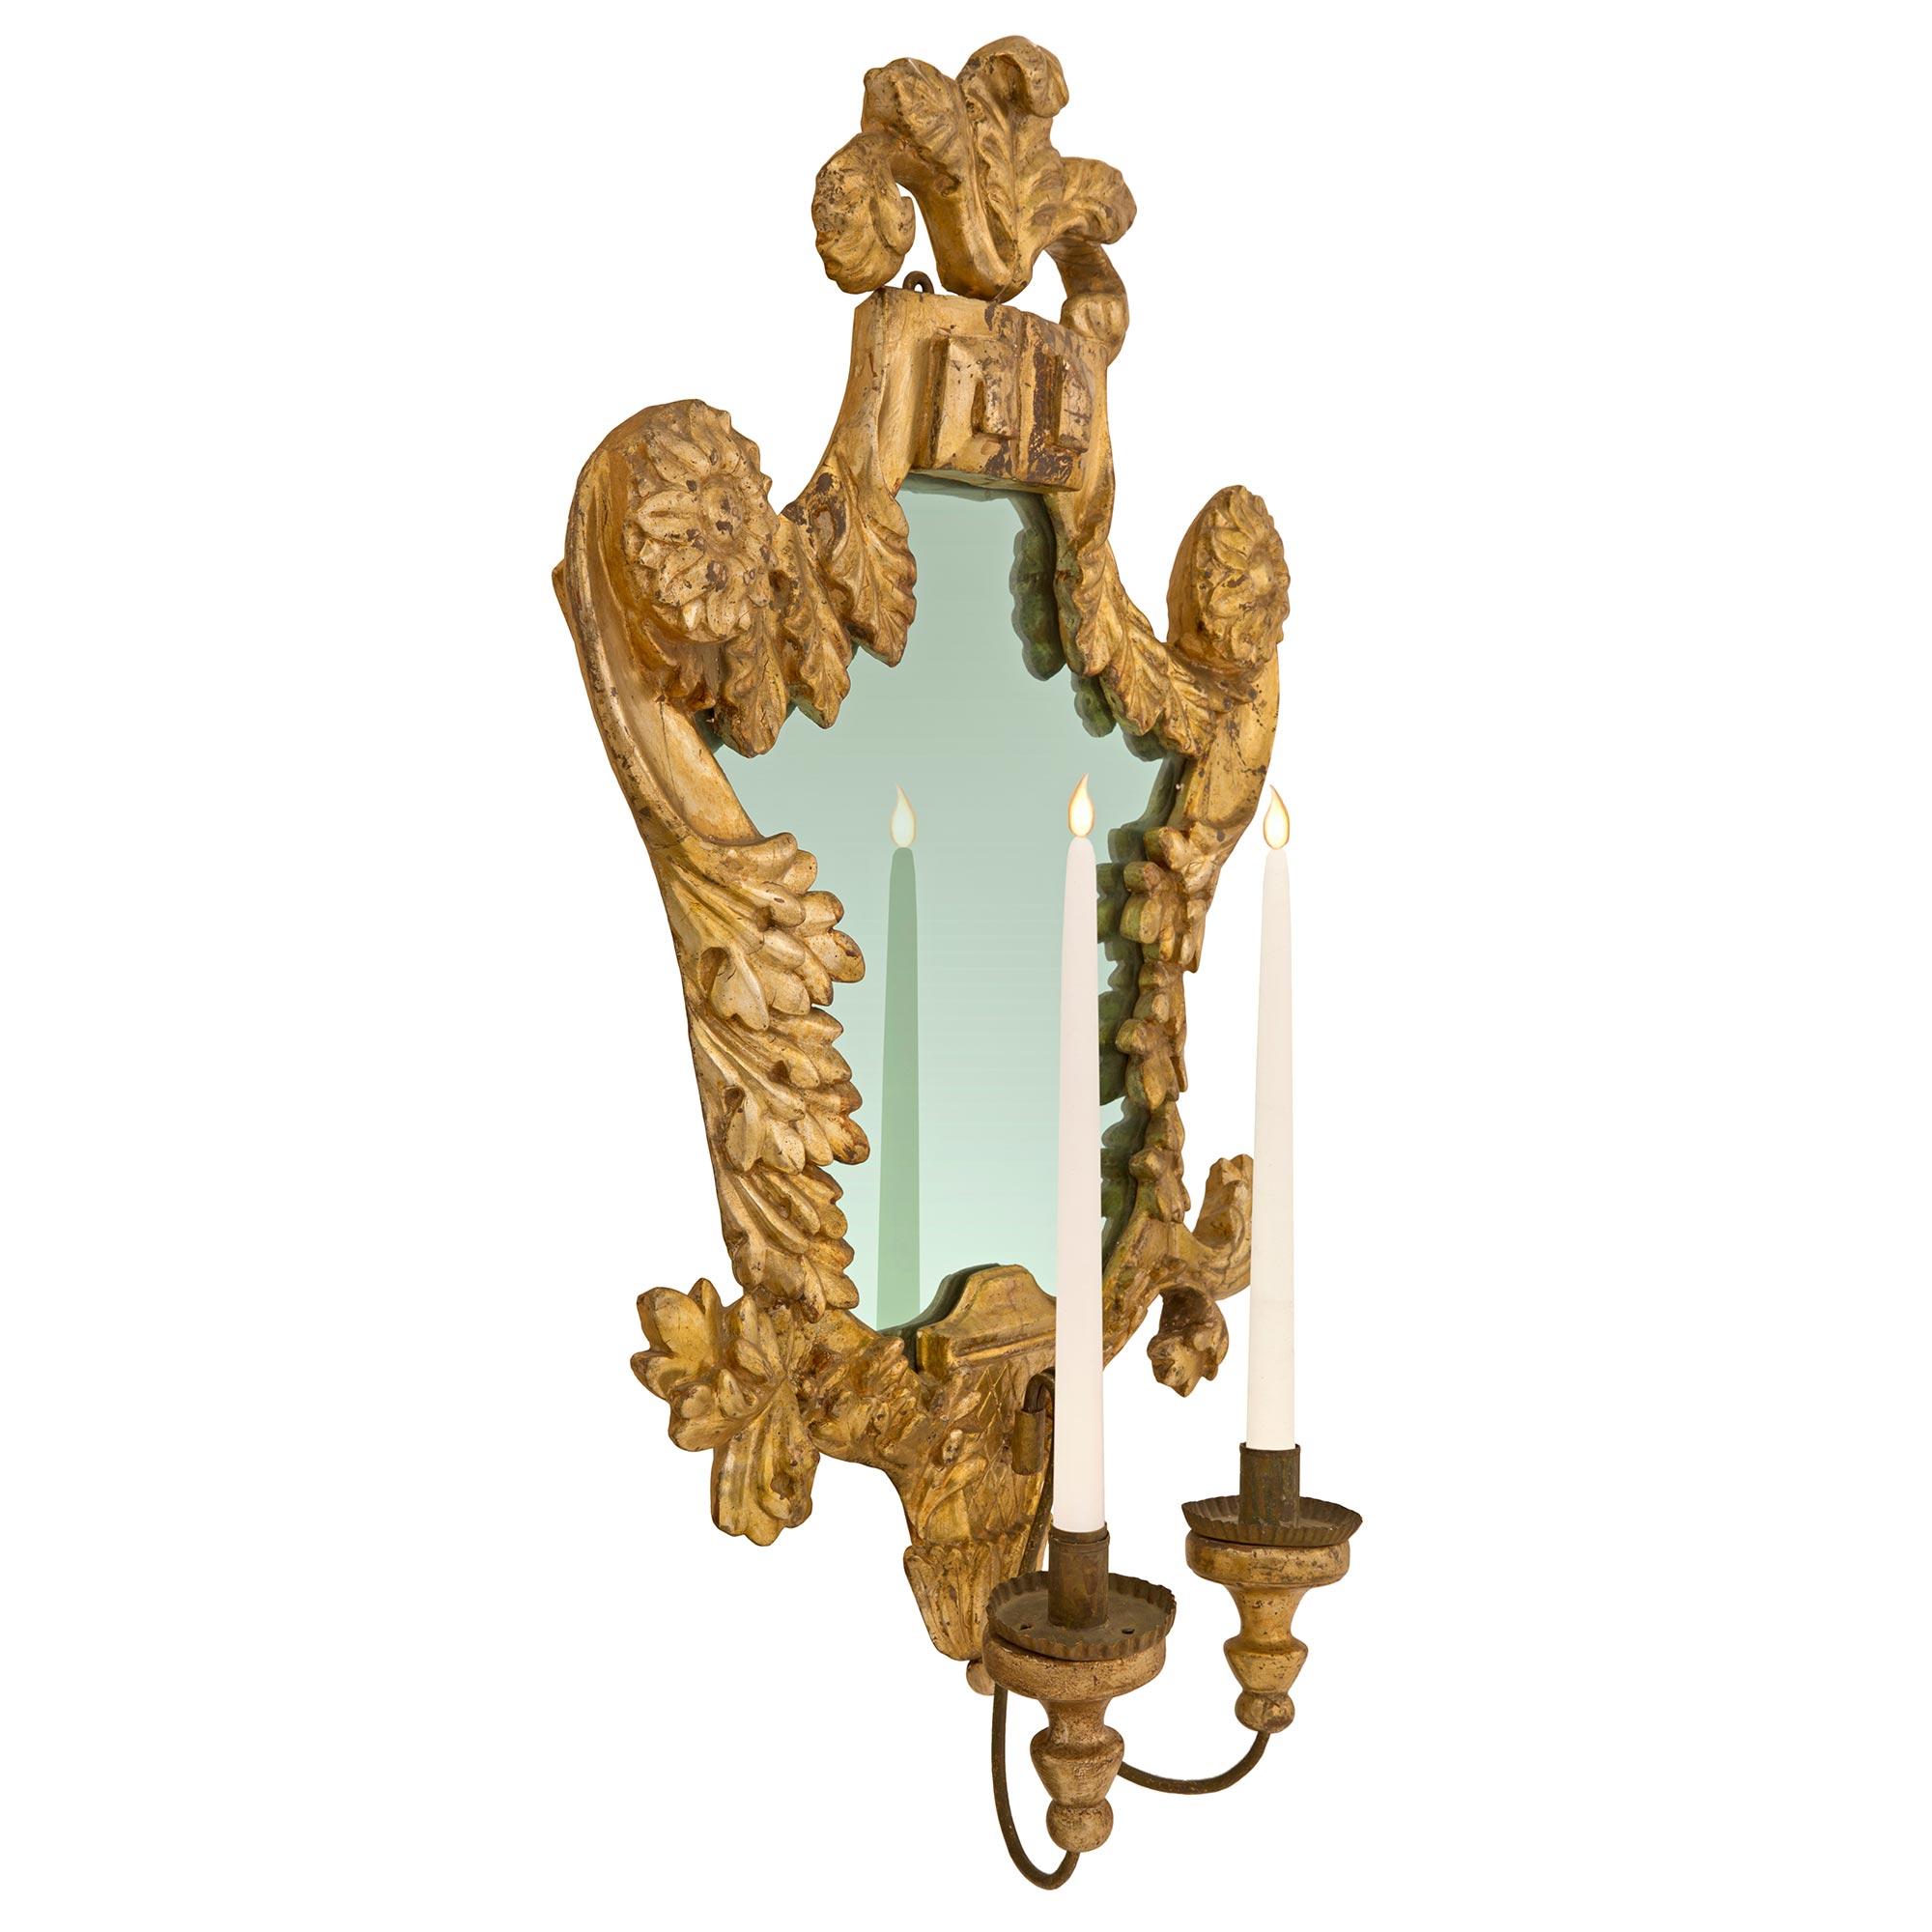 A stunning pair of Italian 18th century Venetian st. Mecca and wrought iron mirrored sconces. Each beautifully shaped sconce retains its original mirror plate set within most decorative scrolled carved foliate designs and richly carved leaves